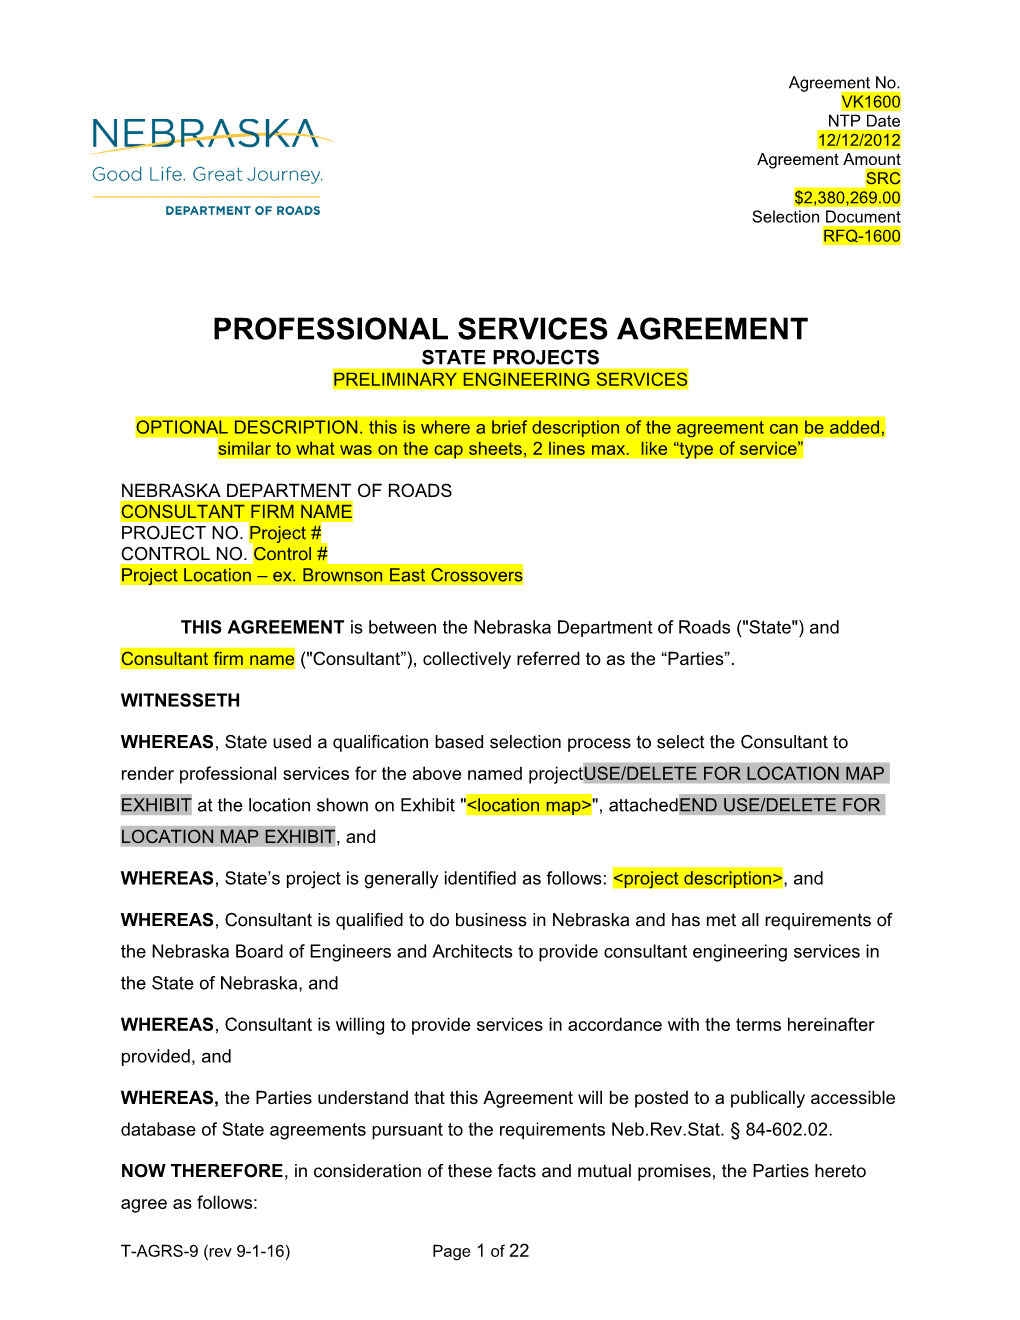 Professional Services Agreement s2